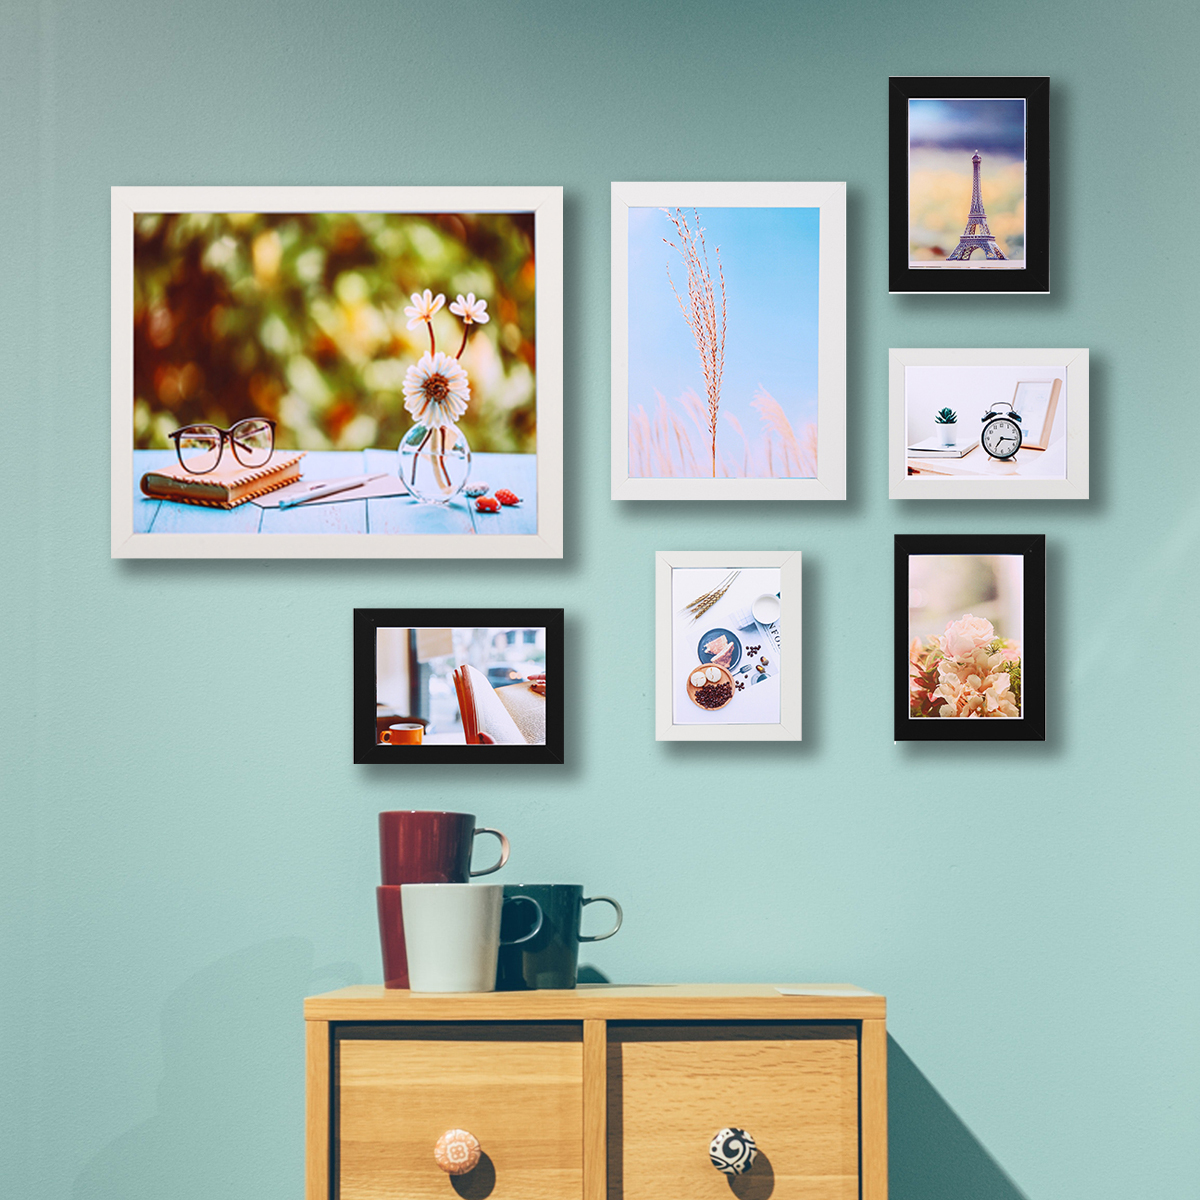 7-Pcsset-Photo-Frames-5710-inch-Wall-Hanging-Family-Memory-Art-Picture-Photo-Home-Office-Hotel-Decor-1769826-11